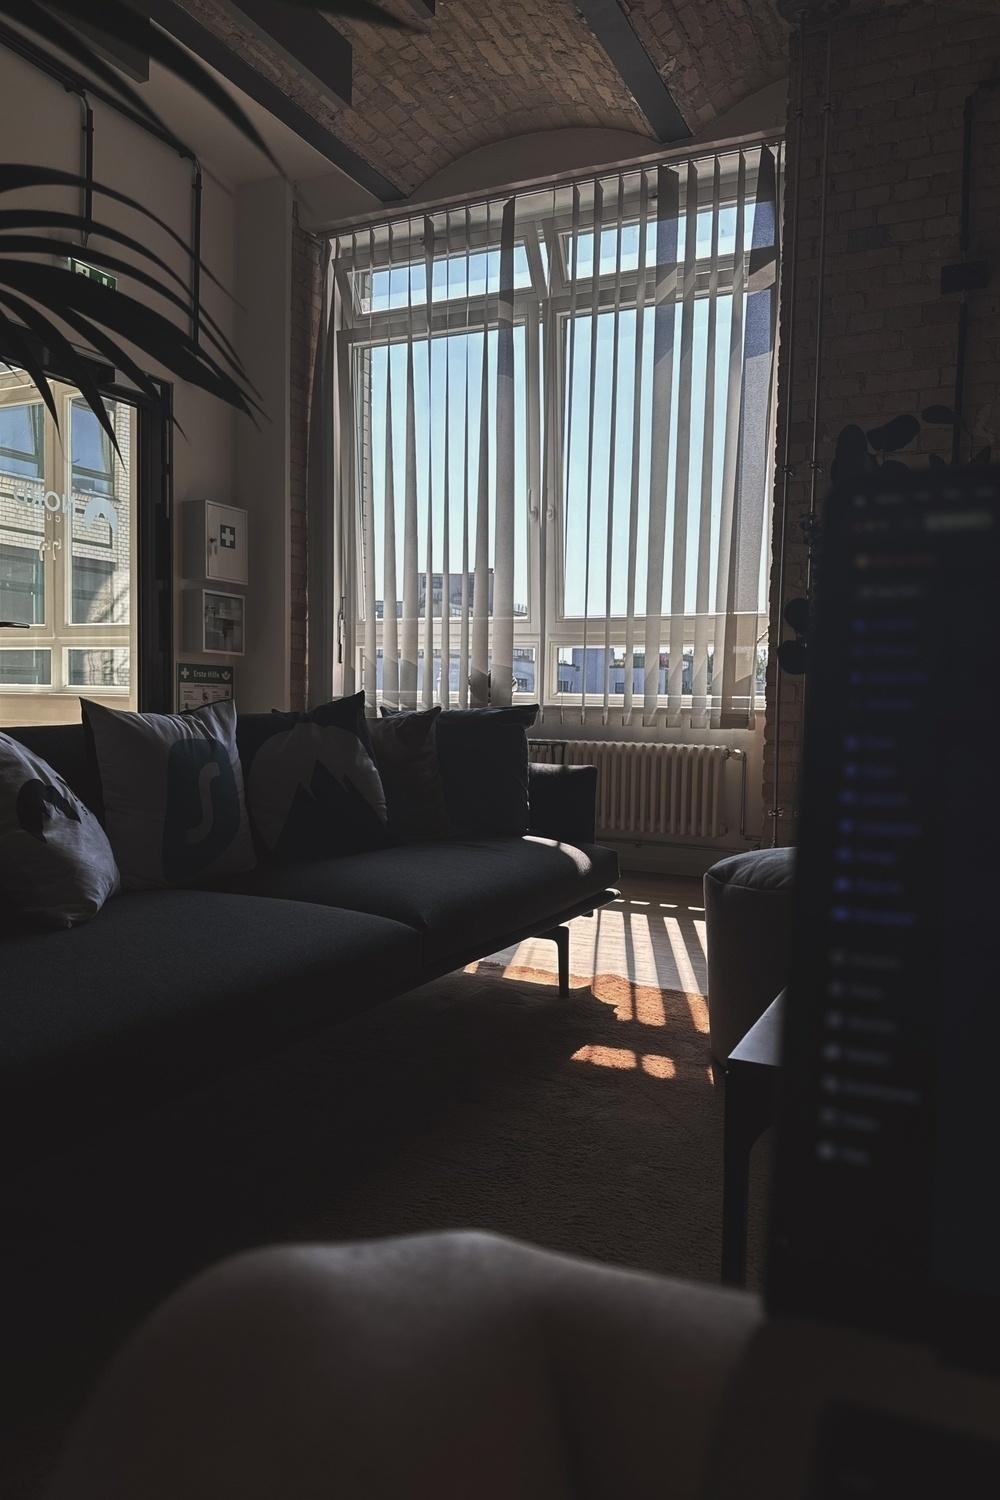 A cozy, sunlit office room features a dark couch with pillows in front of a large window with vertical blinds partially open.